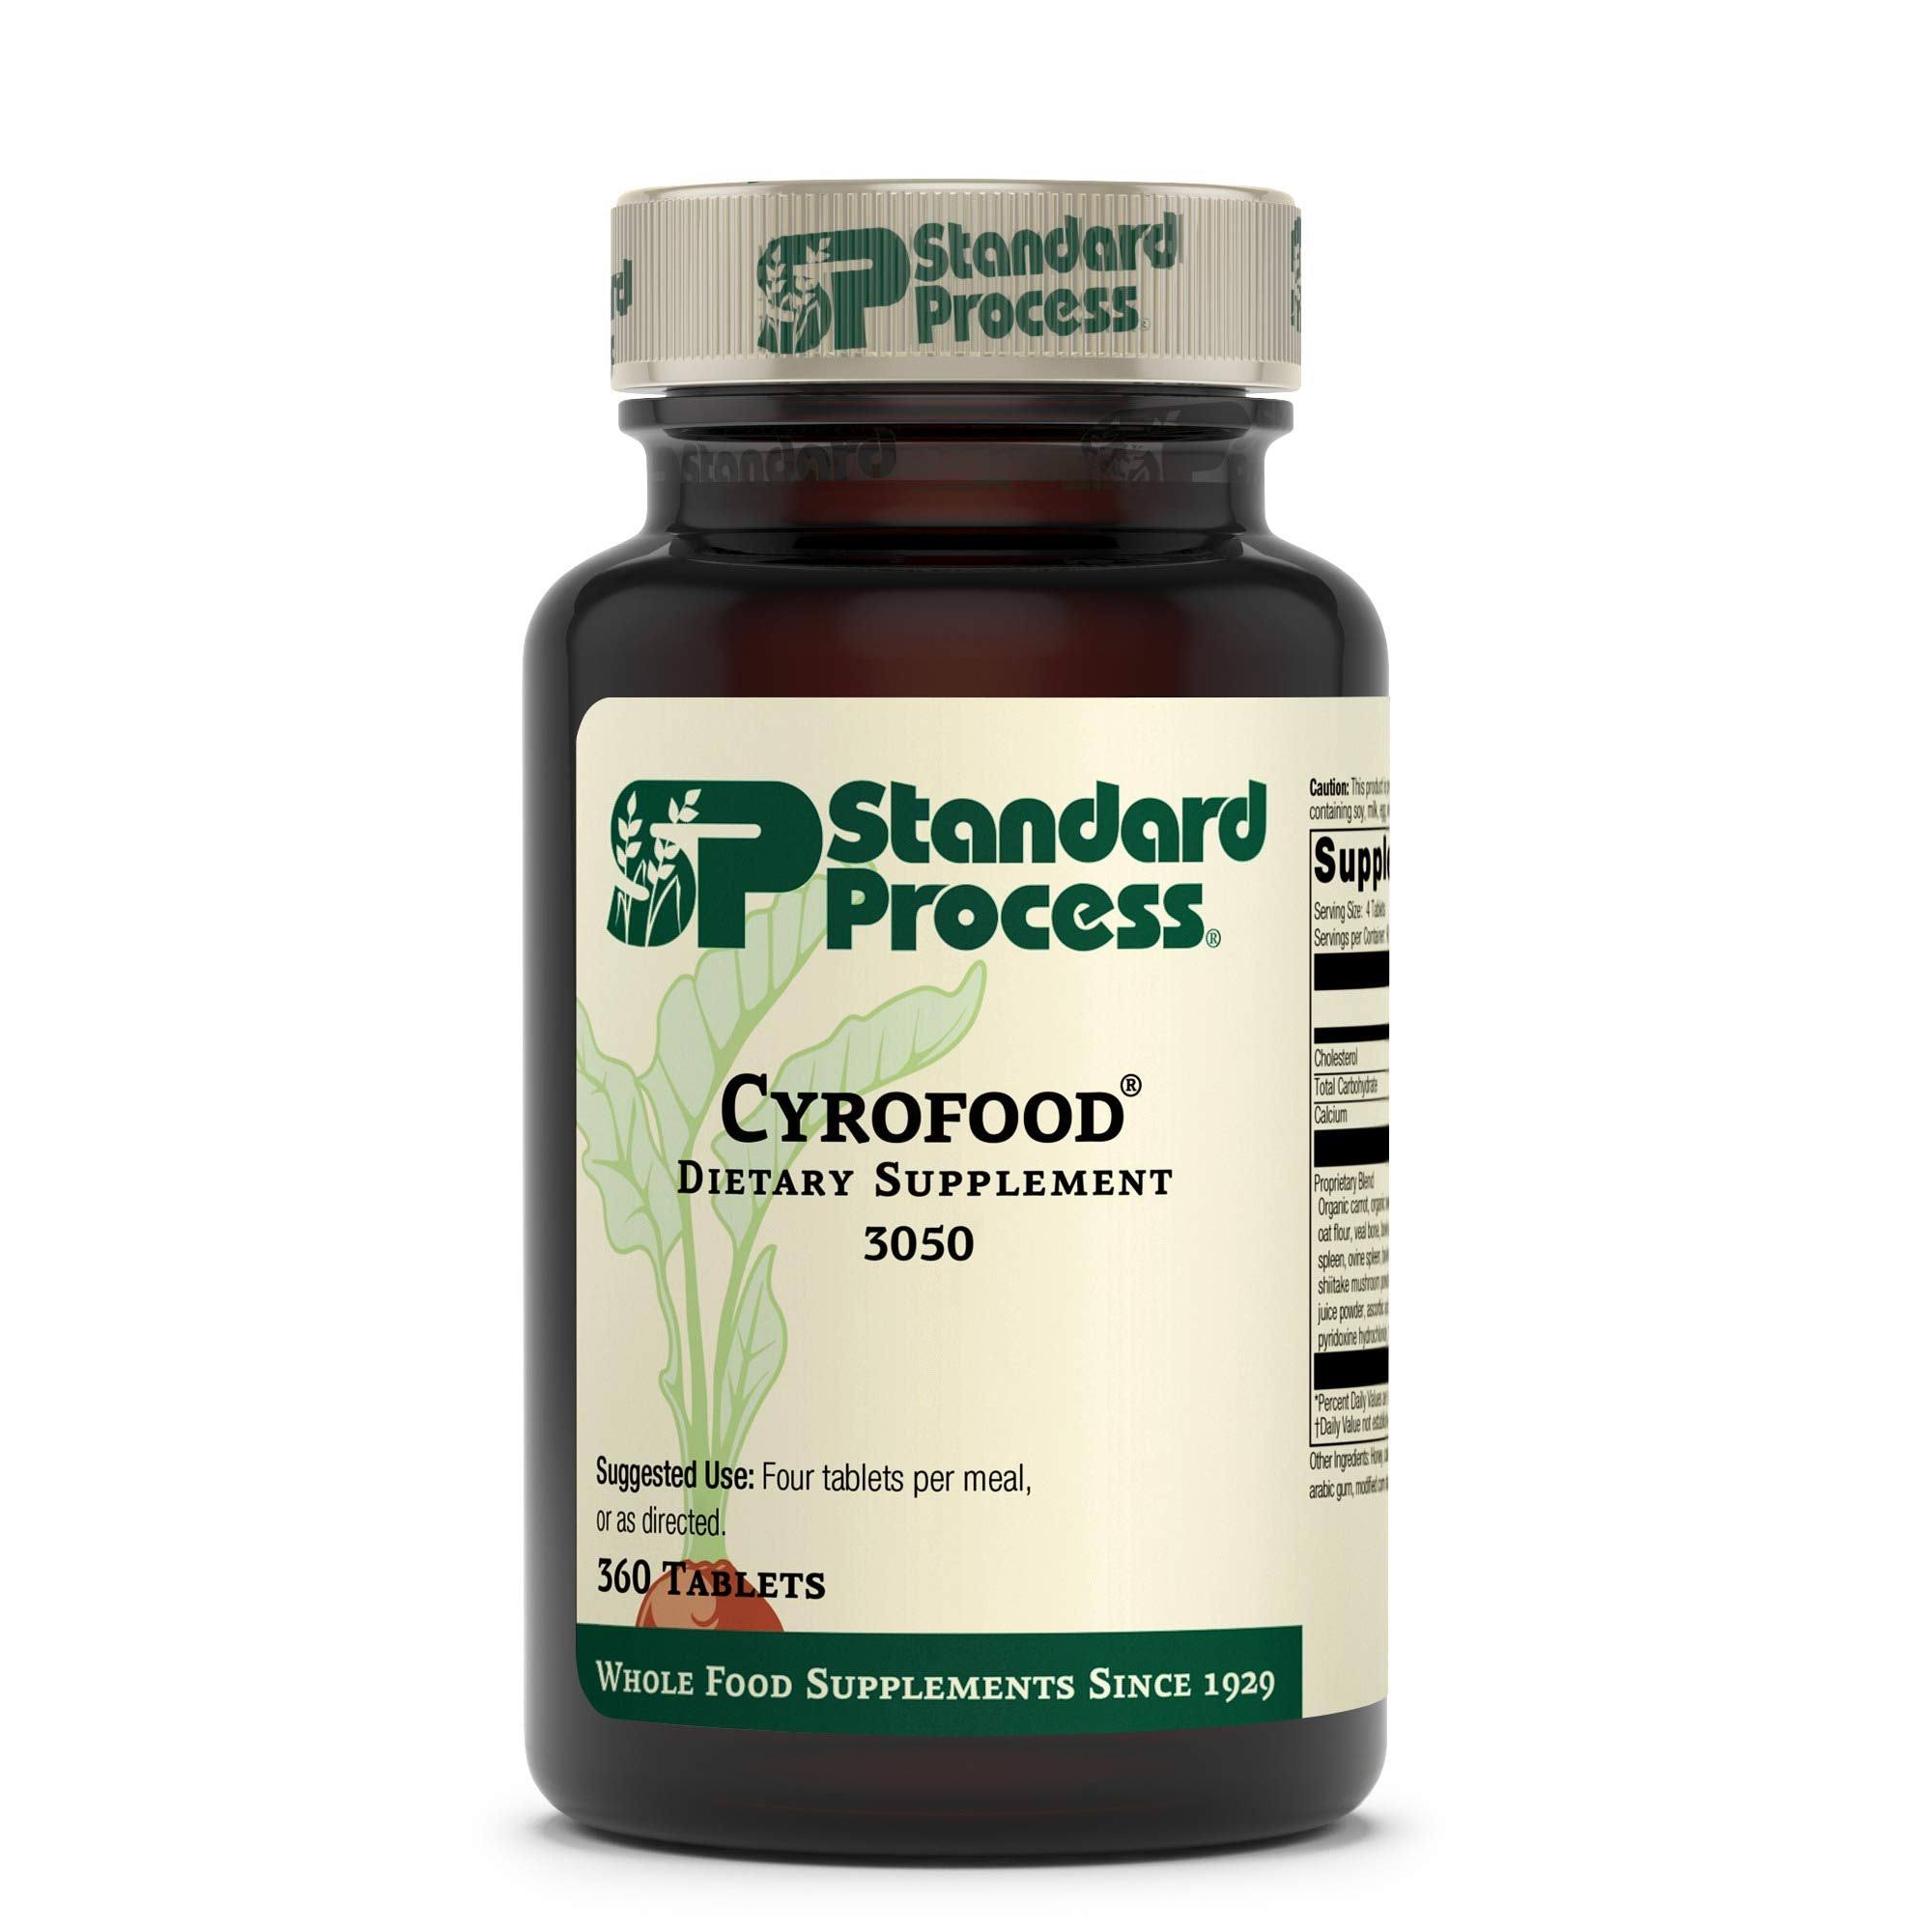 Standard Process Cyrofood - Whole Food Digestion, Digestive Health and